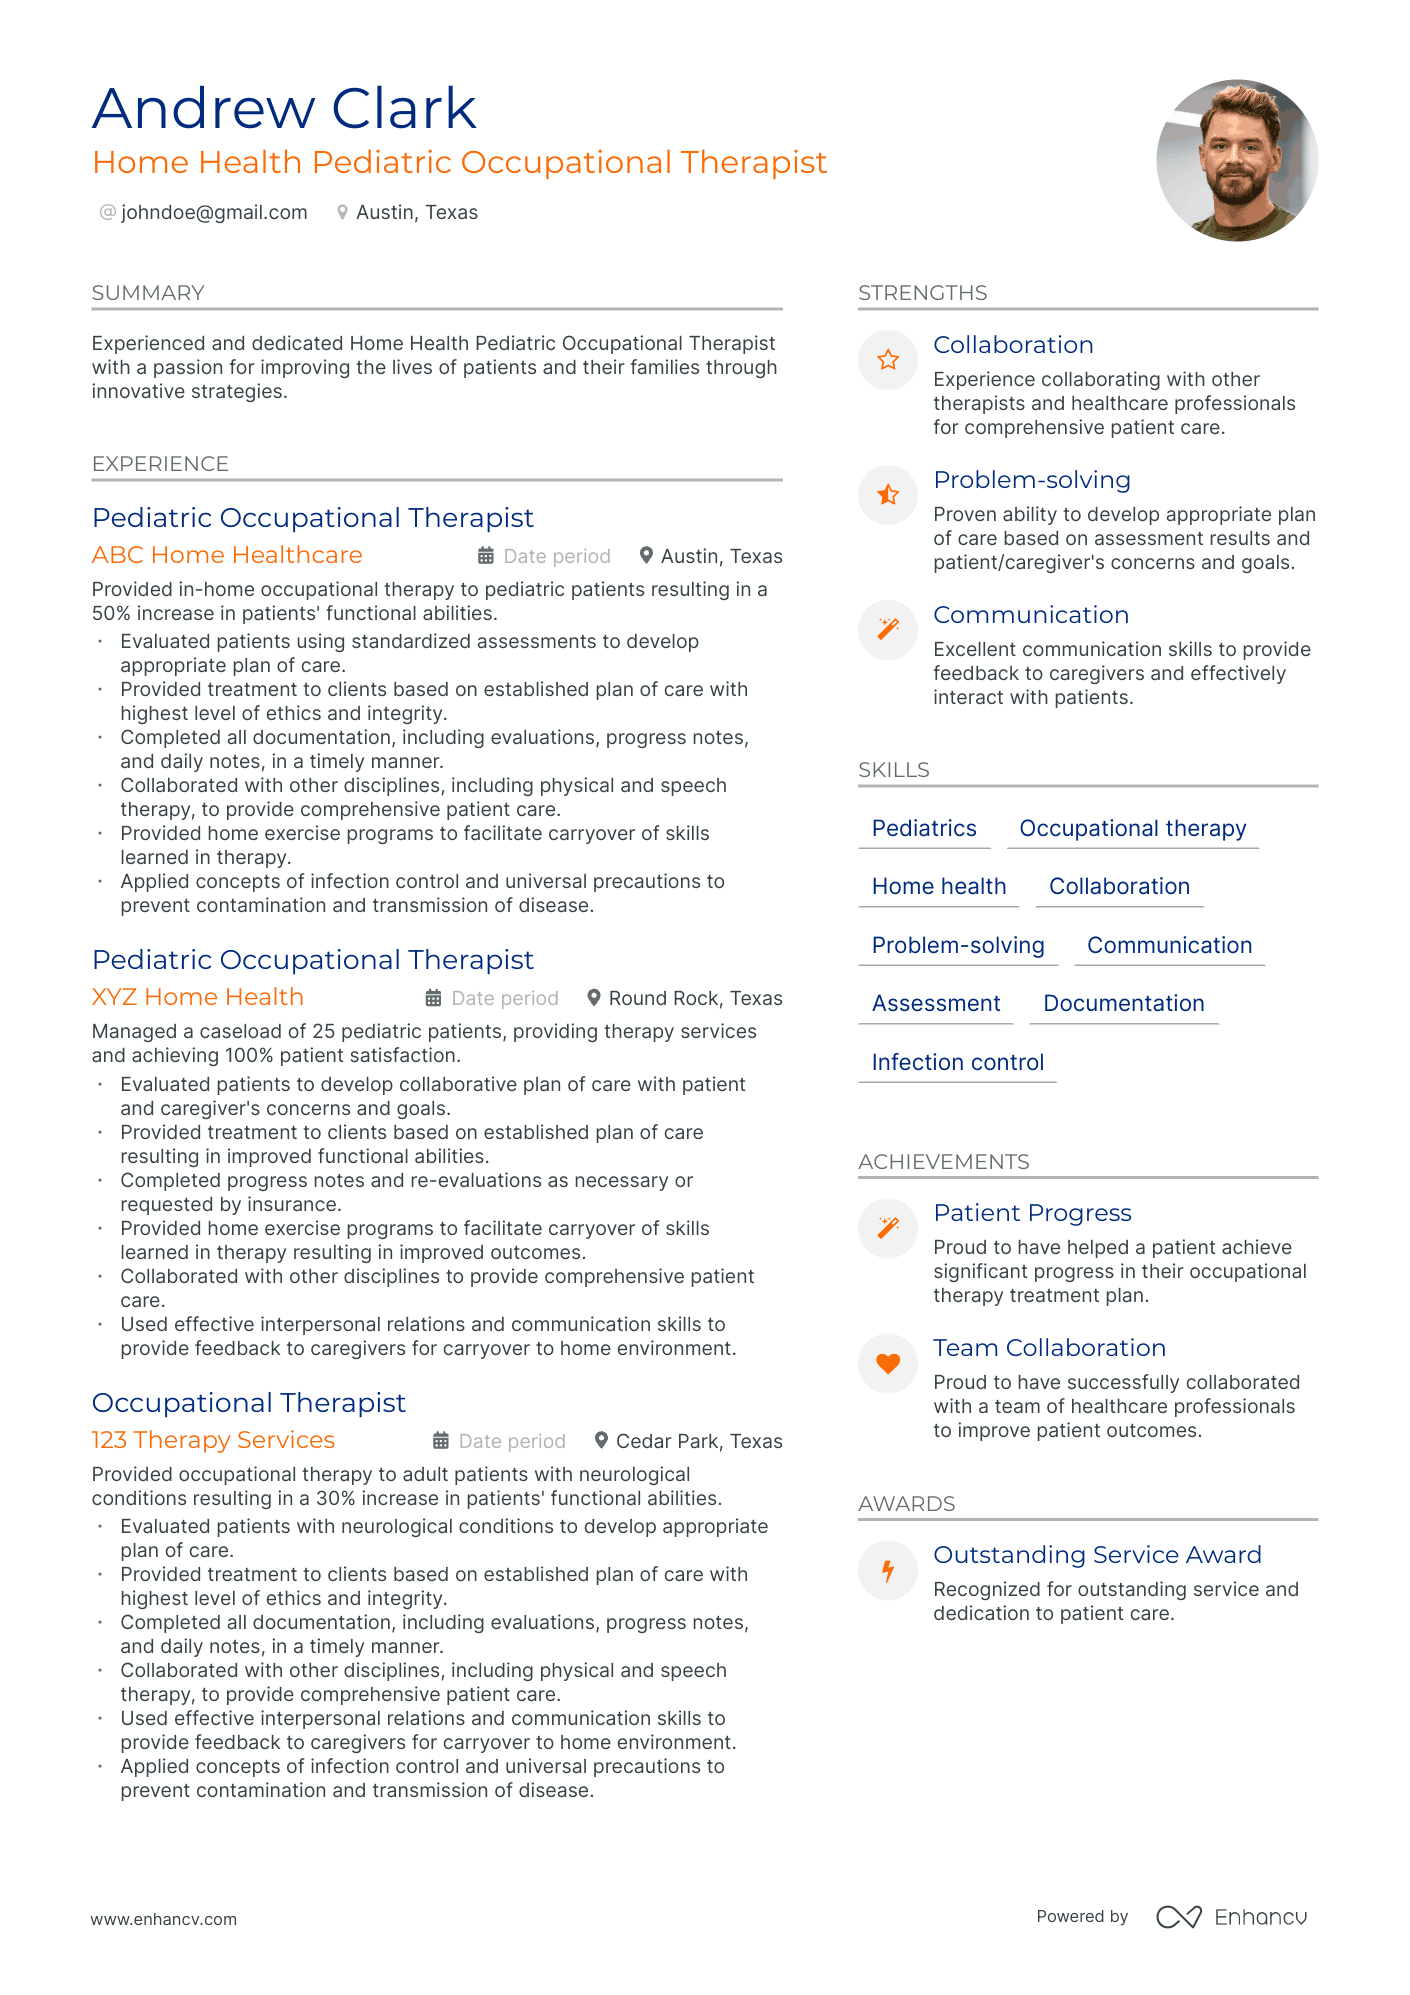 Occupational Therapist resume example